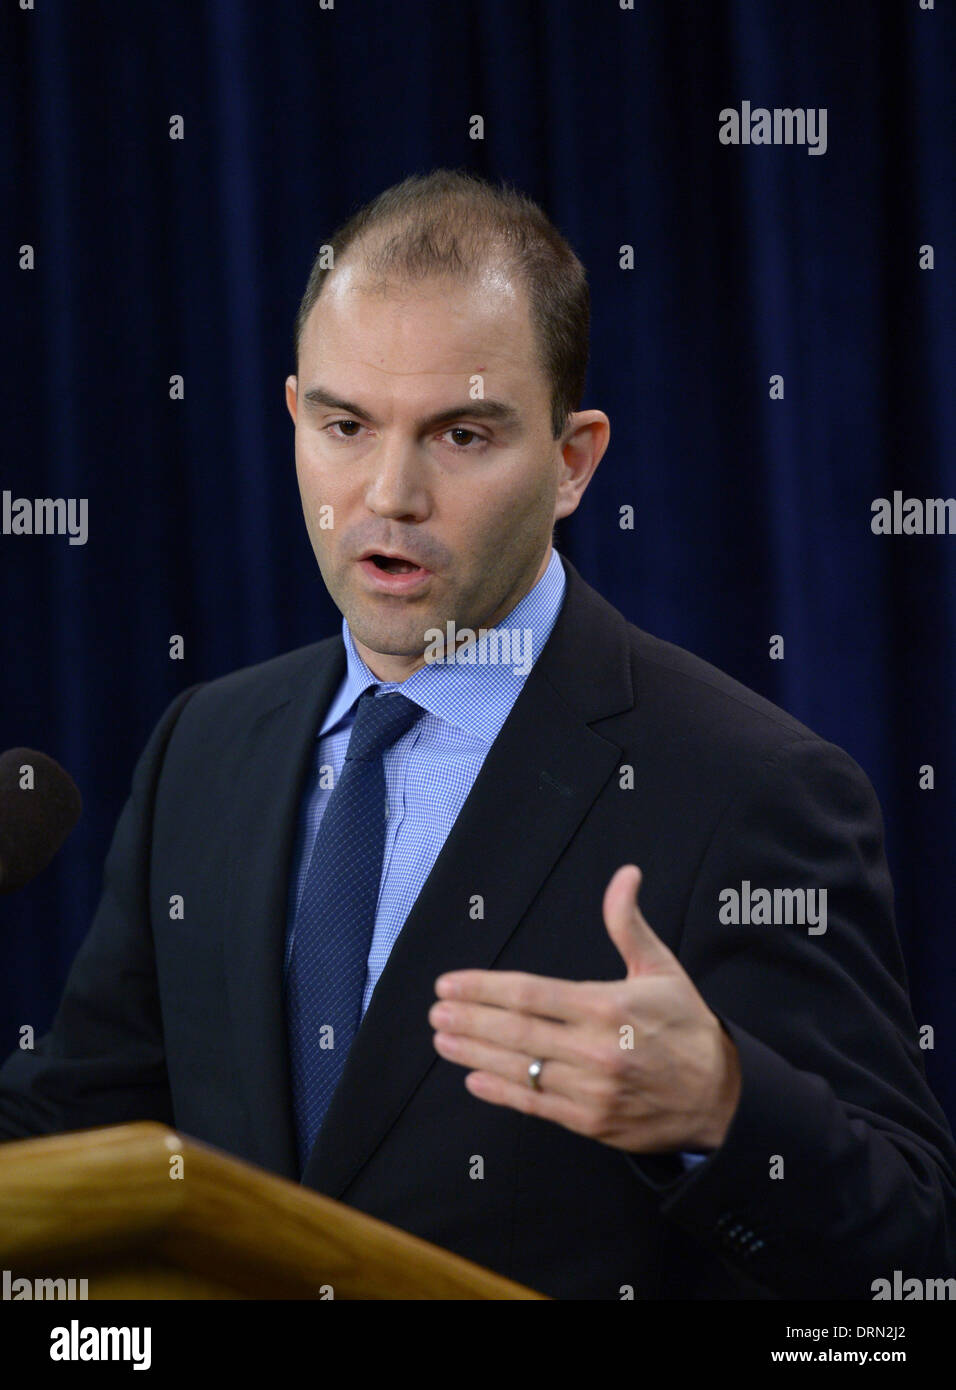 Washington DC, USA. 29th Jan, 2014. White House Deputy National Security Advisor for Strategic Communications Ben Rhodes speaks during a briefing on 2014 Foreign Policy Priorities for the Obama Administration at the Foreign Press Center in Washington DC, the United States, Jan. 29, 2014. Credit:  Yin Bogu/Xinhua/Alamy Live News Stock Photo